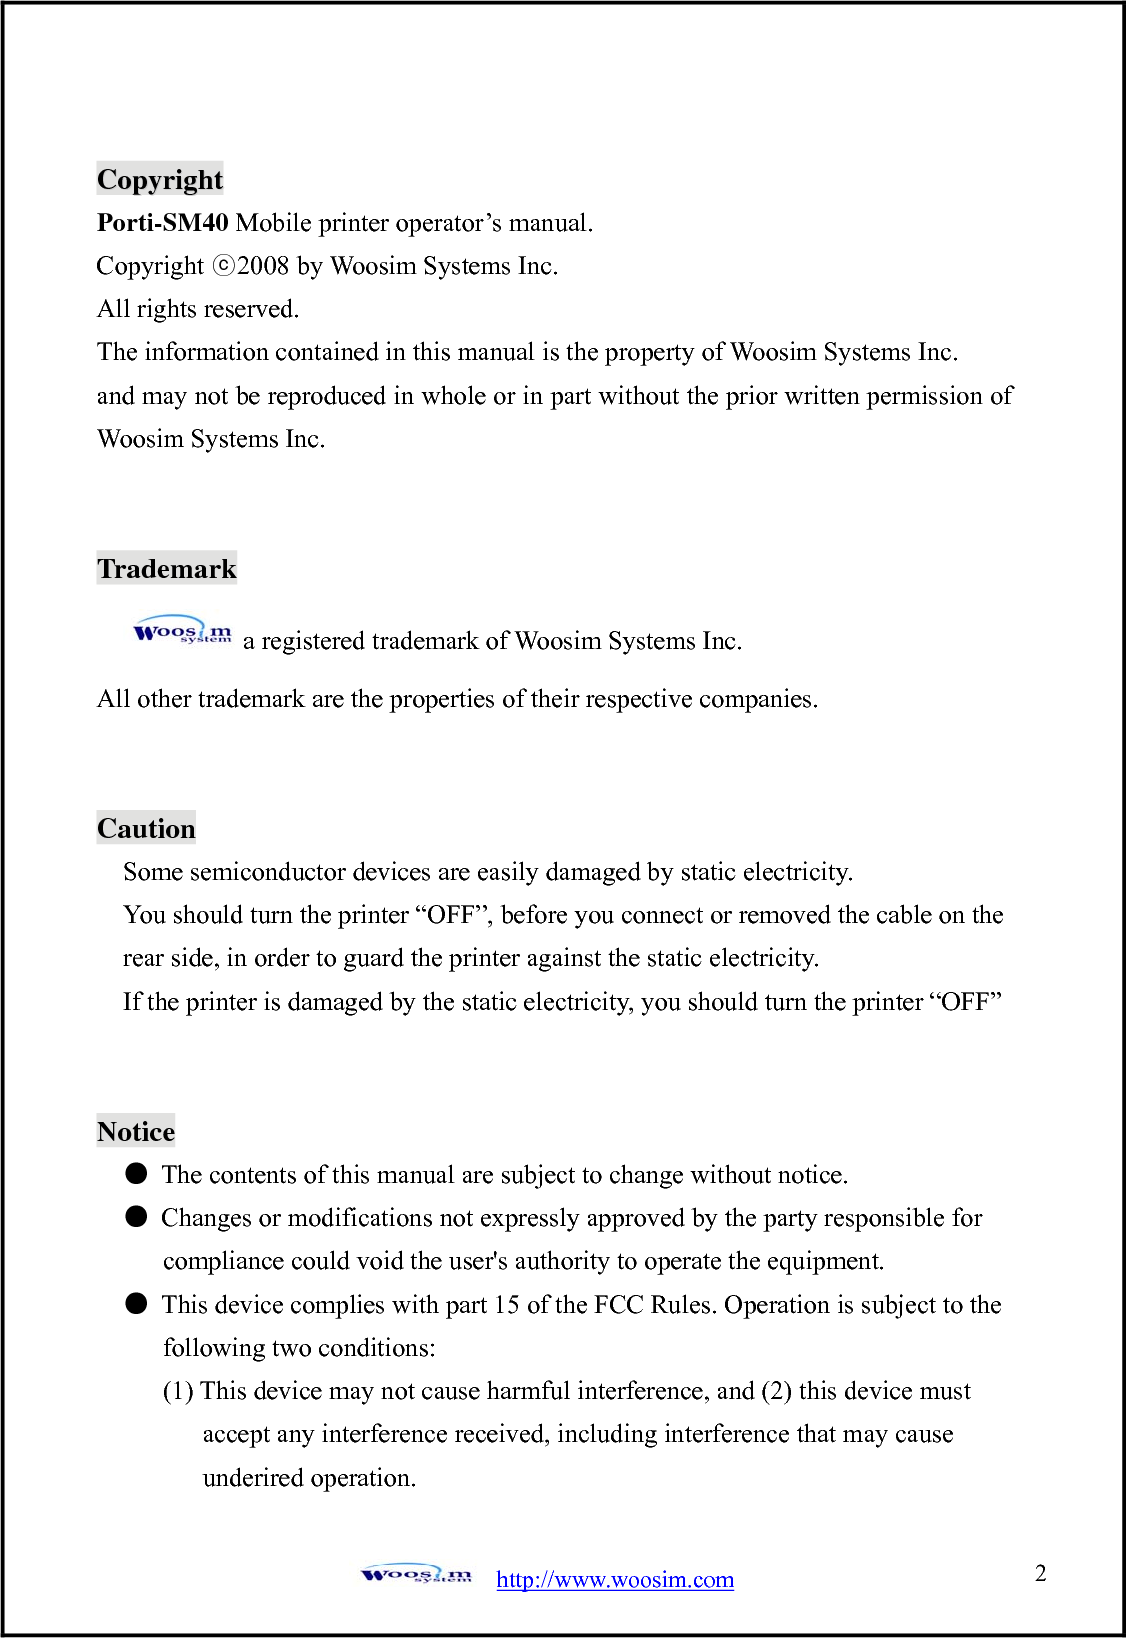  http://www.woosim.com 2                               CCooppyyrriigghhtt  Porti-SM40 Mobile printer operator’s manual. Copyright ⓒ2008 by Woosim Systems Inc. All rights reserved. The information contained in this manual is the property of Woosim Systems Inc. and may not be reproduced in whole or in part without the prior written permission of Woosim Systems Inc.   Trademark a registered trademark of Woosim Systems Inc. All other trademark are the properties of their respective companies.   Caution Some semiconductor devices are easily damaged by static electricity.   You should turn the printer “OFF”, before you connect or removed the cable on the rear side, in order to guard the printer against the static electricity.   If the printer is damaged by the static electricity, you should turn the printer “OFF”   Notice ●  The contents of this manual are subject to change without notice. ●  Changes or modifications not expressly approved by the party responsible for         compliance could void the user&apos;s authority to operate the equipment. ●  This device complies with part 15 of the FCC Rules. Operation is subject to the        following two conditions:       (1) This device may not cause harmful interference, and (2) this device must           accept any interference received, including interference that may cause            underired operation. 